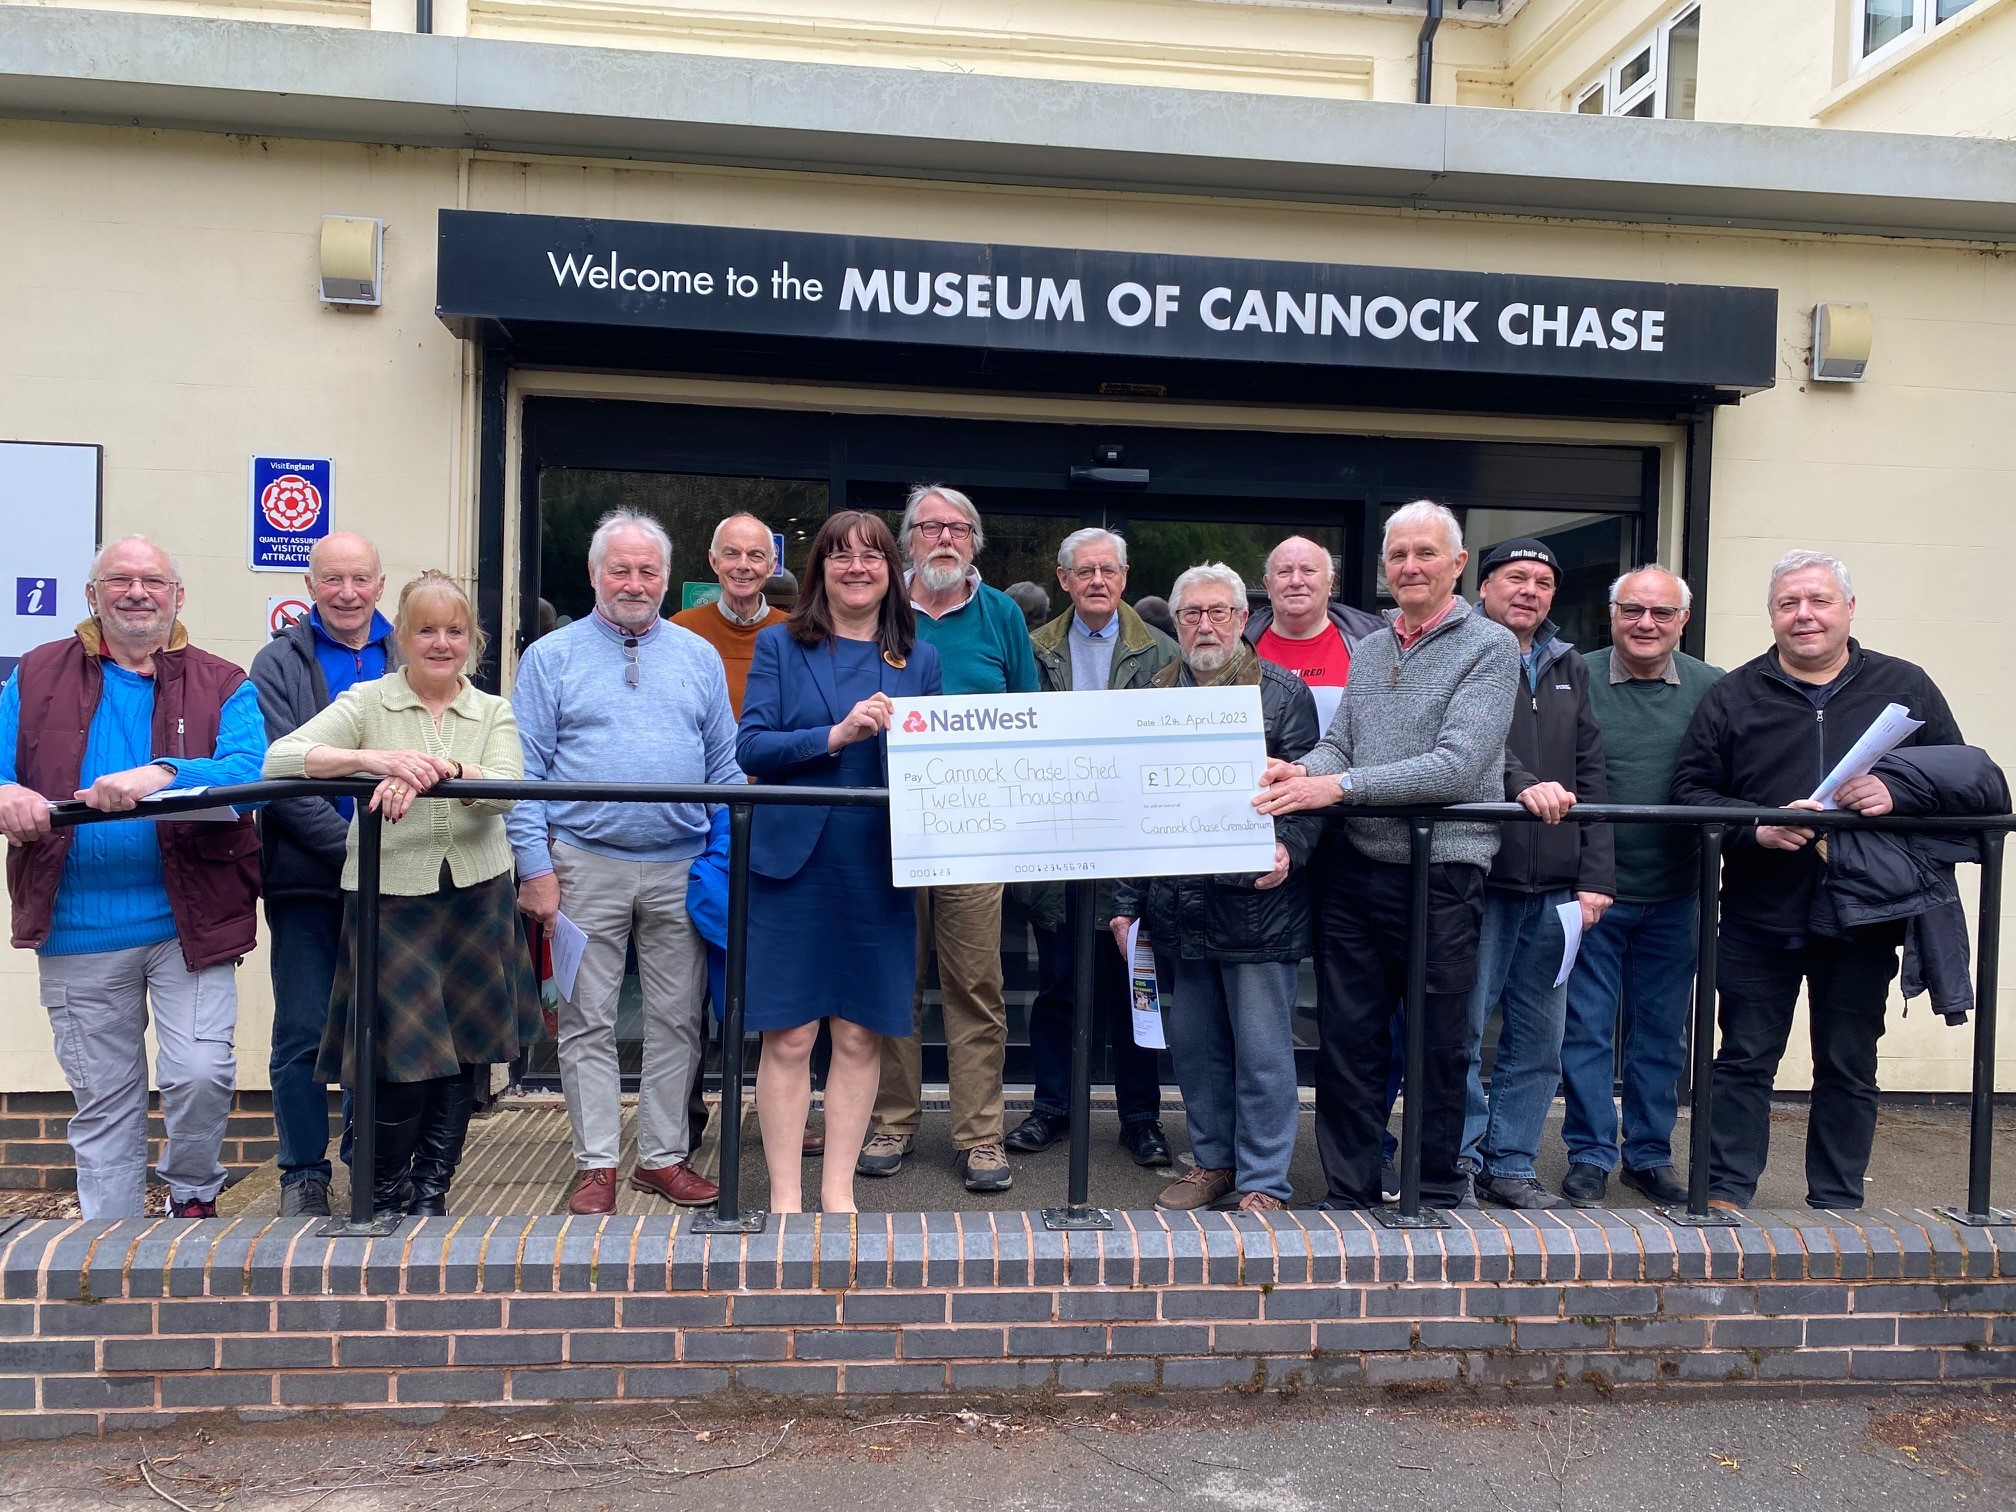 Cannock Chase Crematorium £12,000 donation to Cannock Chase Shed is helping local people and local community projects